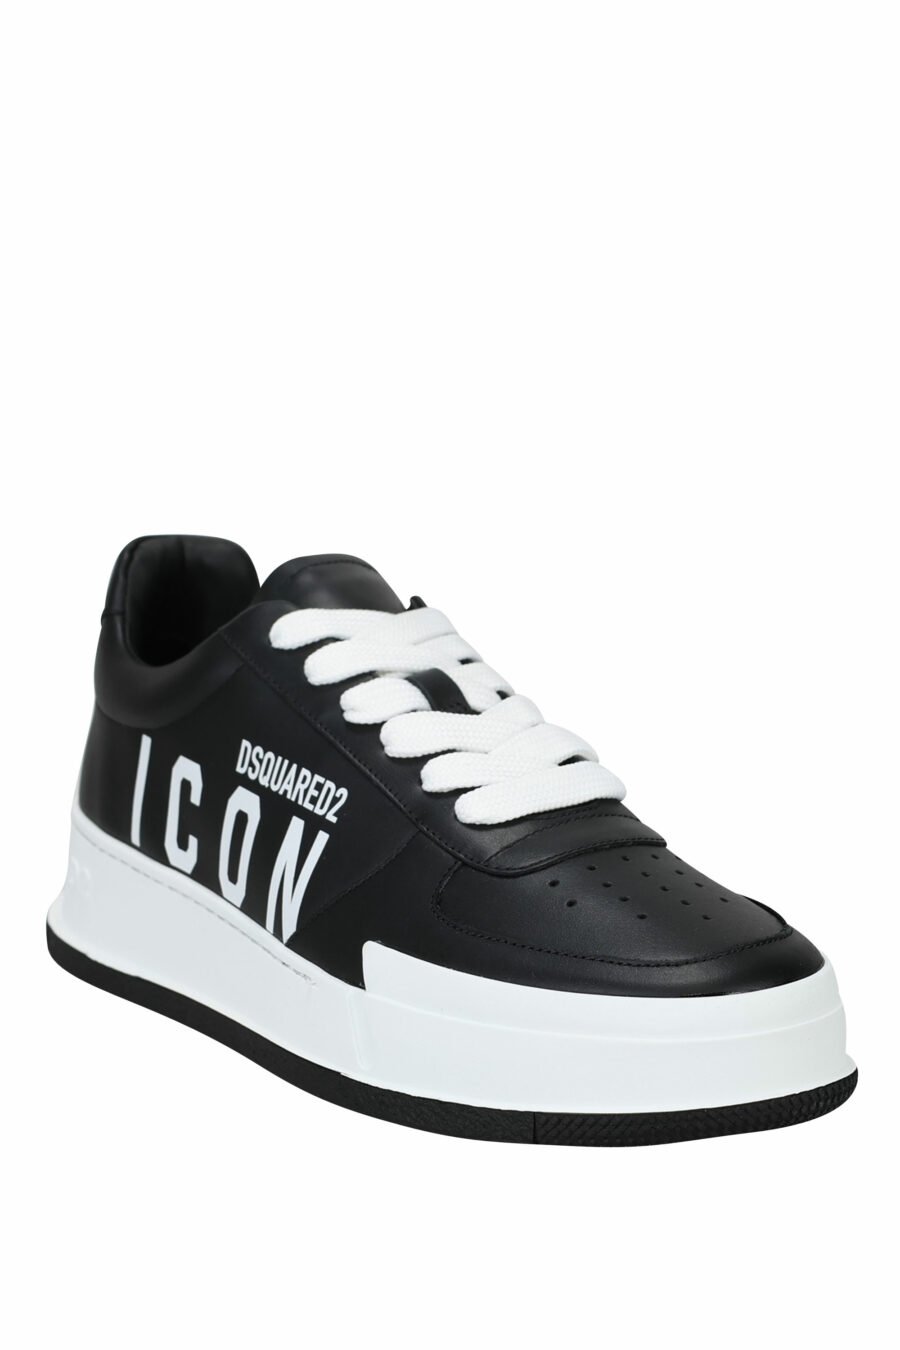 Black trainers with "icon" logo and white sole - 8055777248911 1